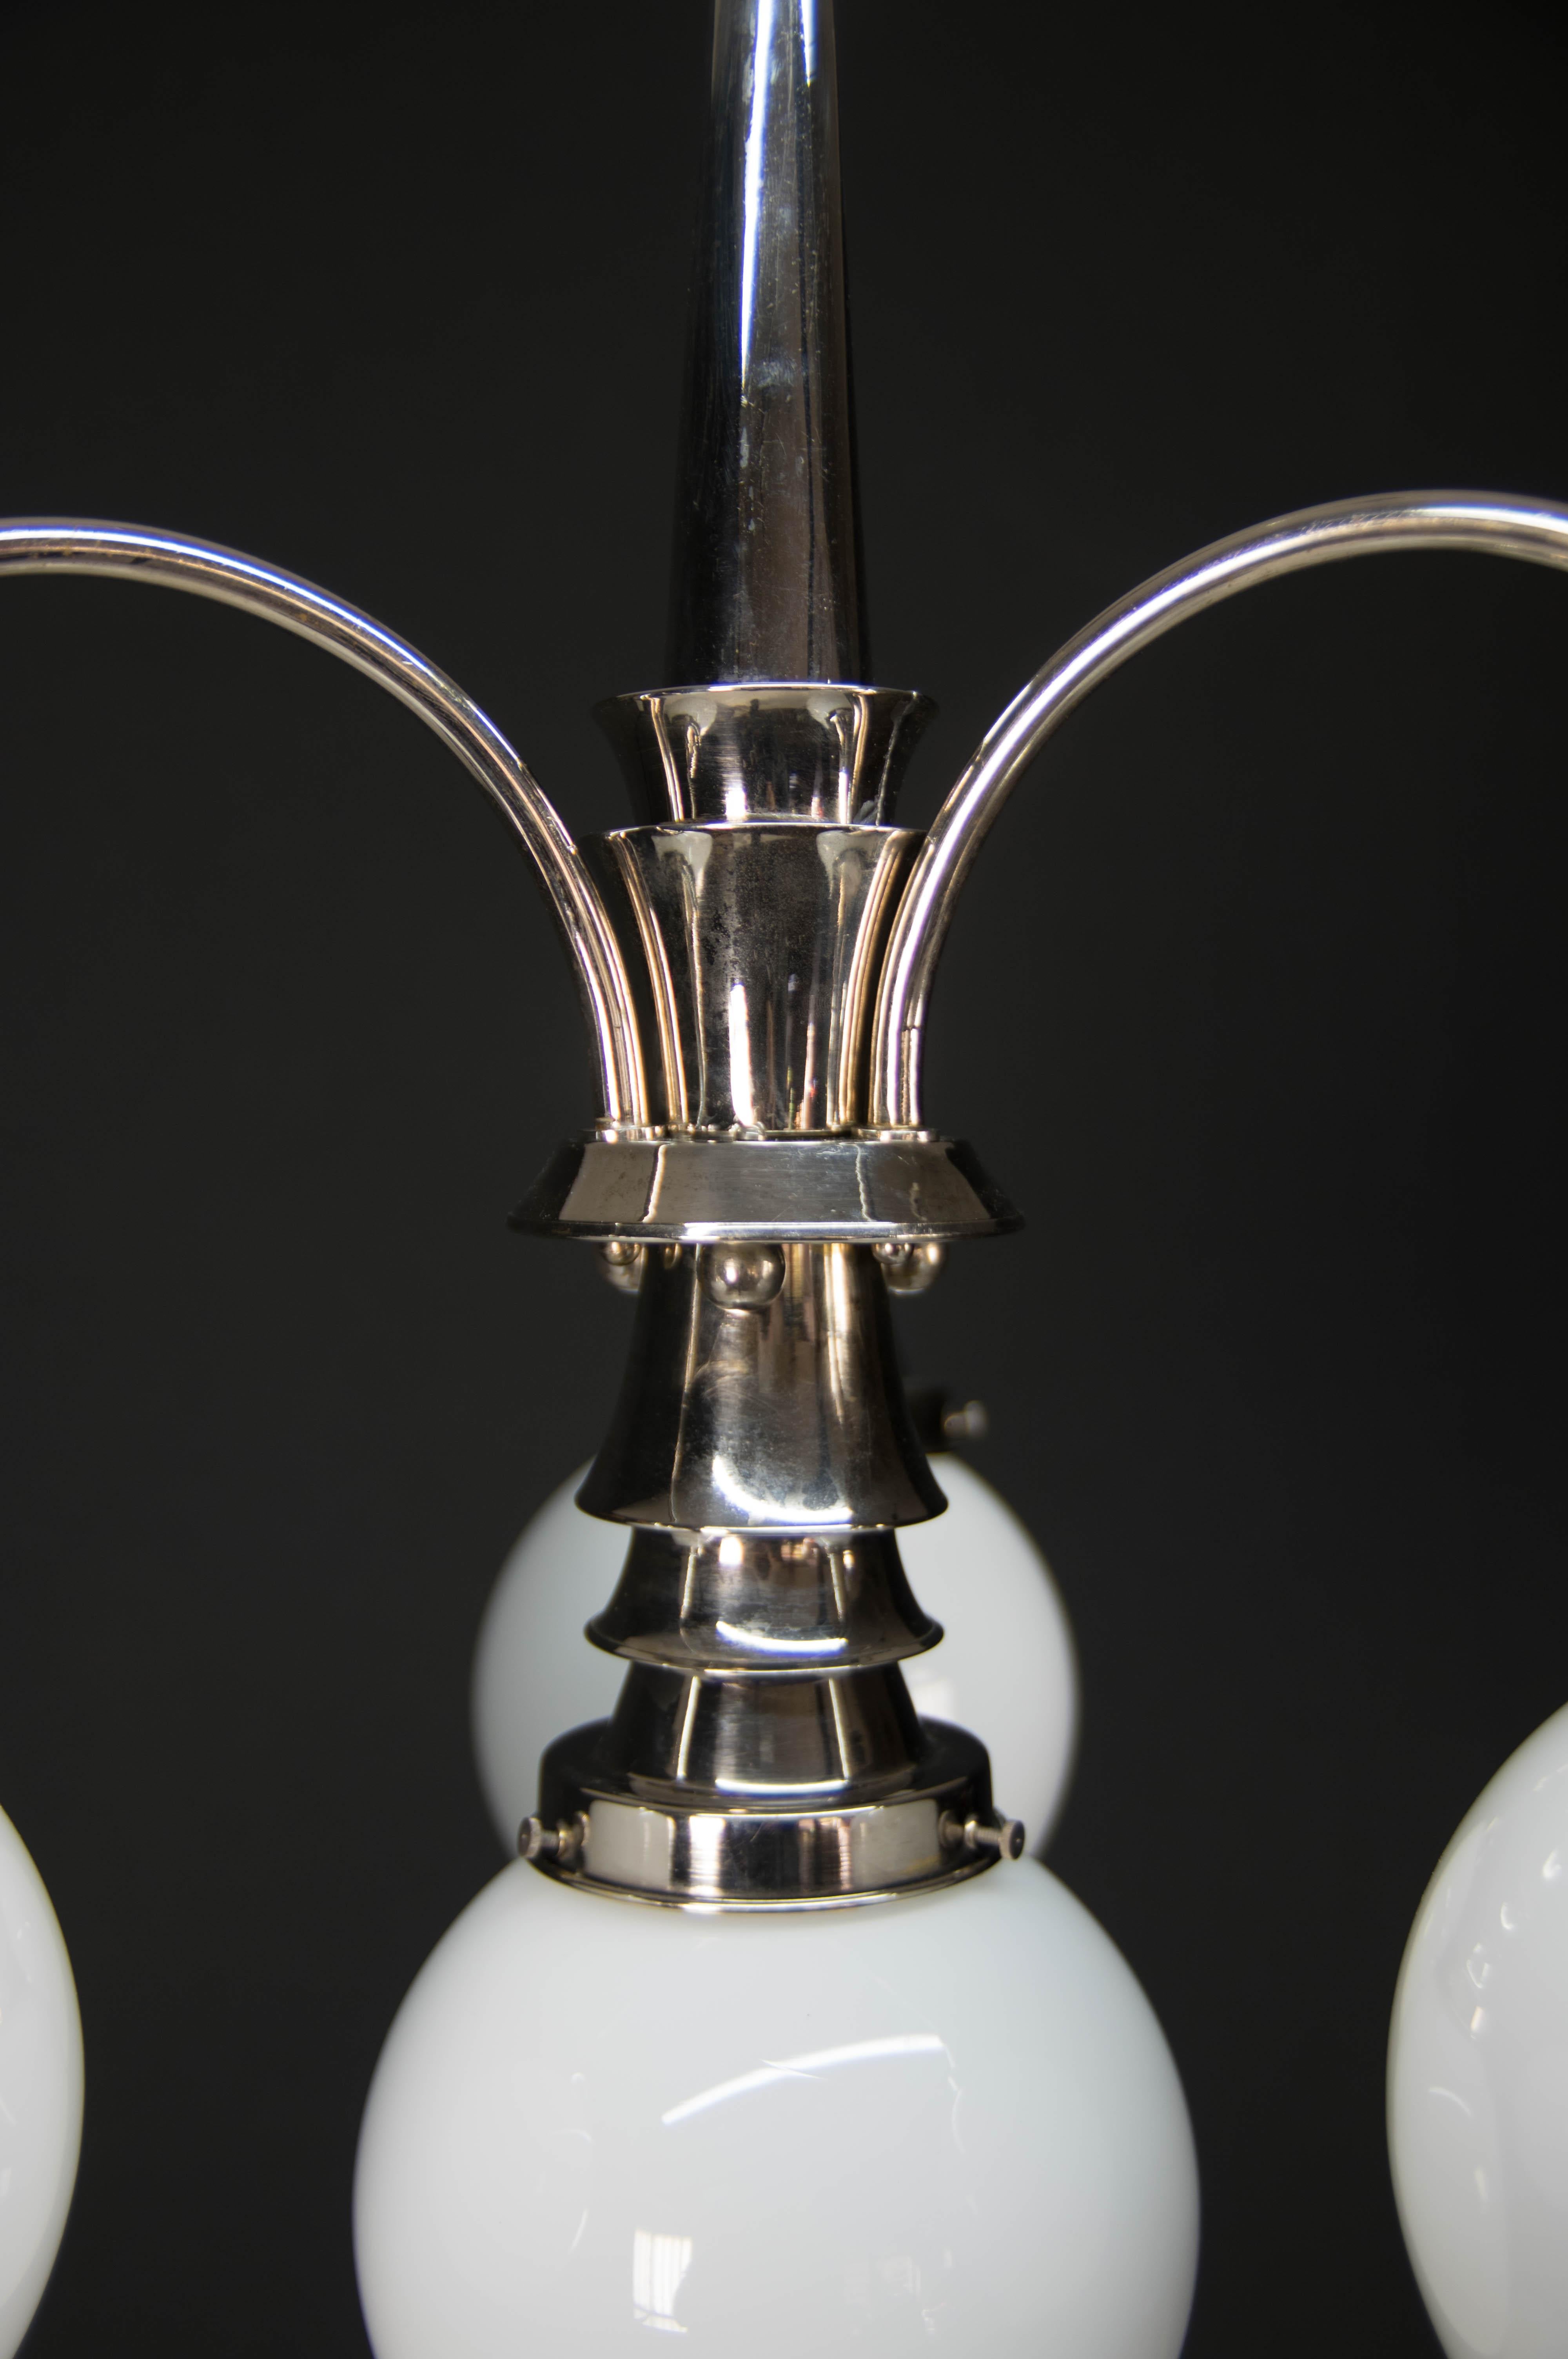 Completely restored, polished.
Diameter of the globe 16cm
4x40W, E25-E27 bulbs
US wiring compatible.